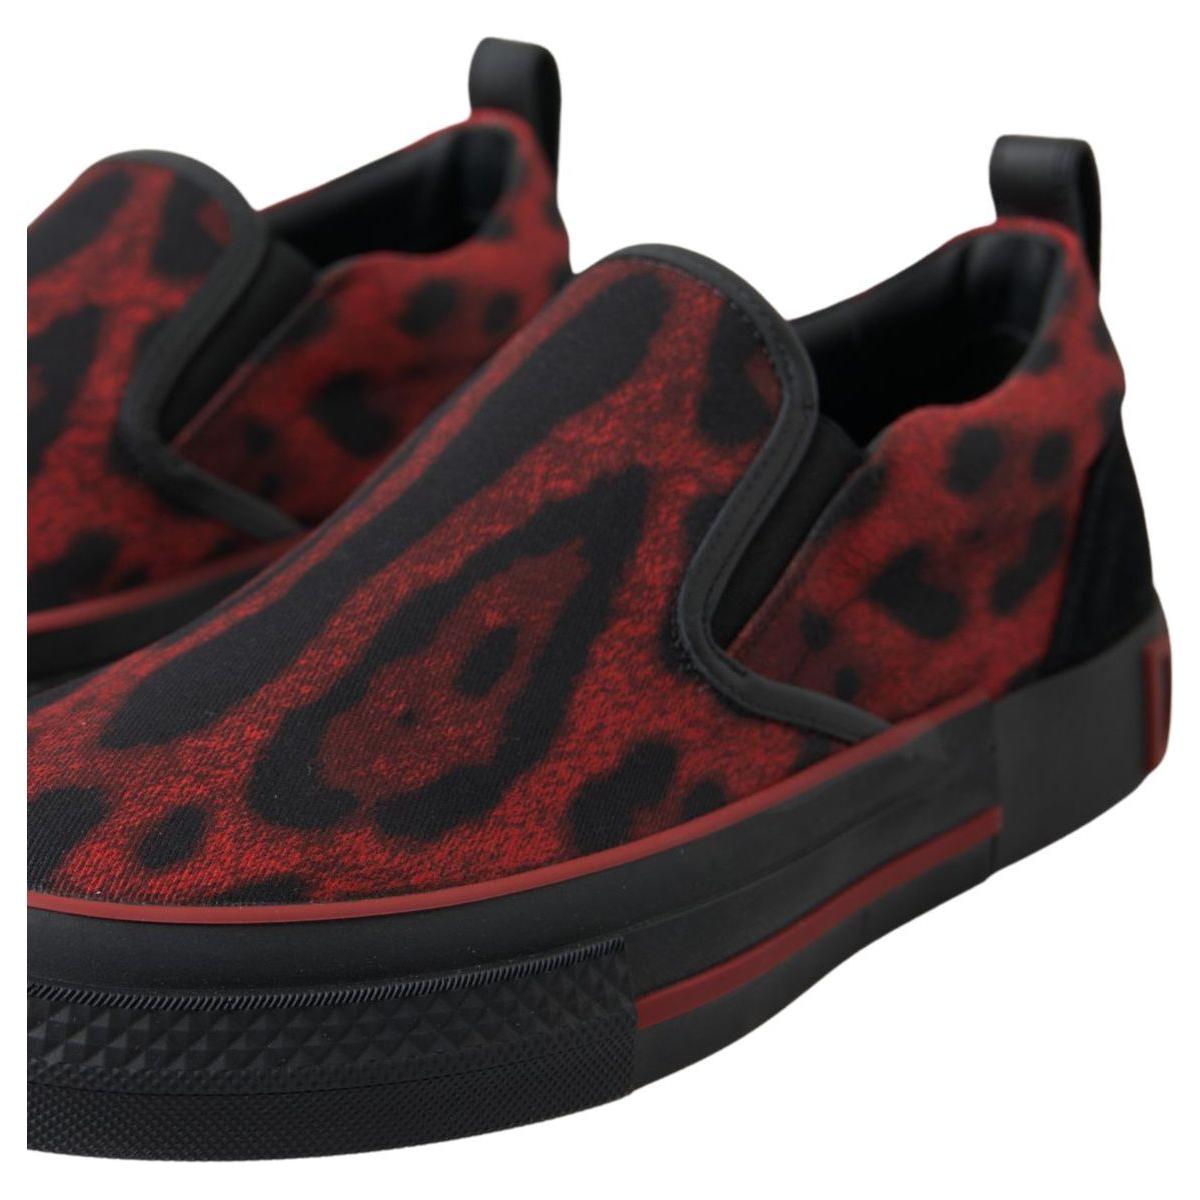 Dolce & Gabbana Chic Leopard Print Loafers Sneakers red-black-leopard-loafers-sneakers-shoes